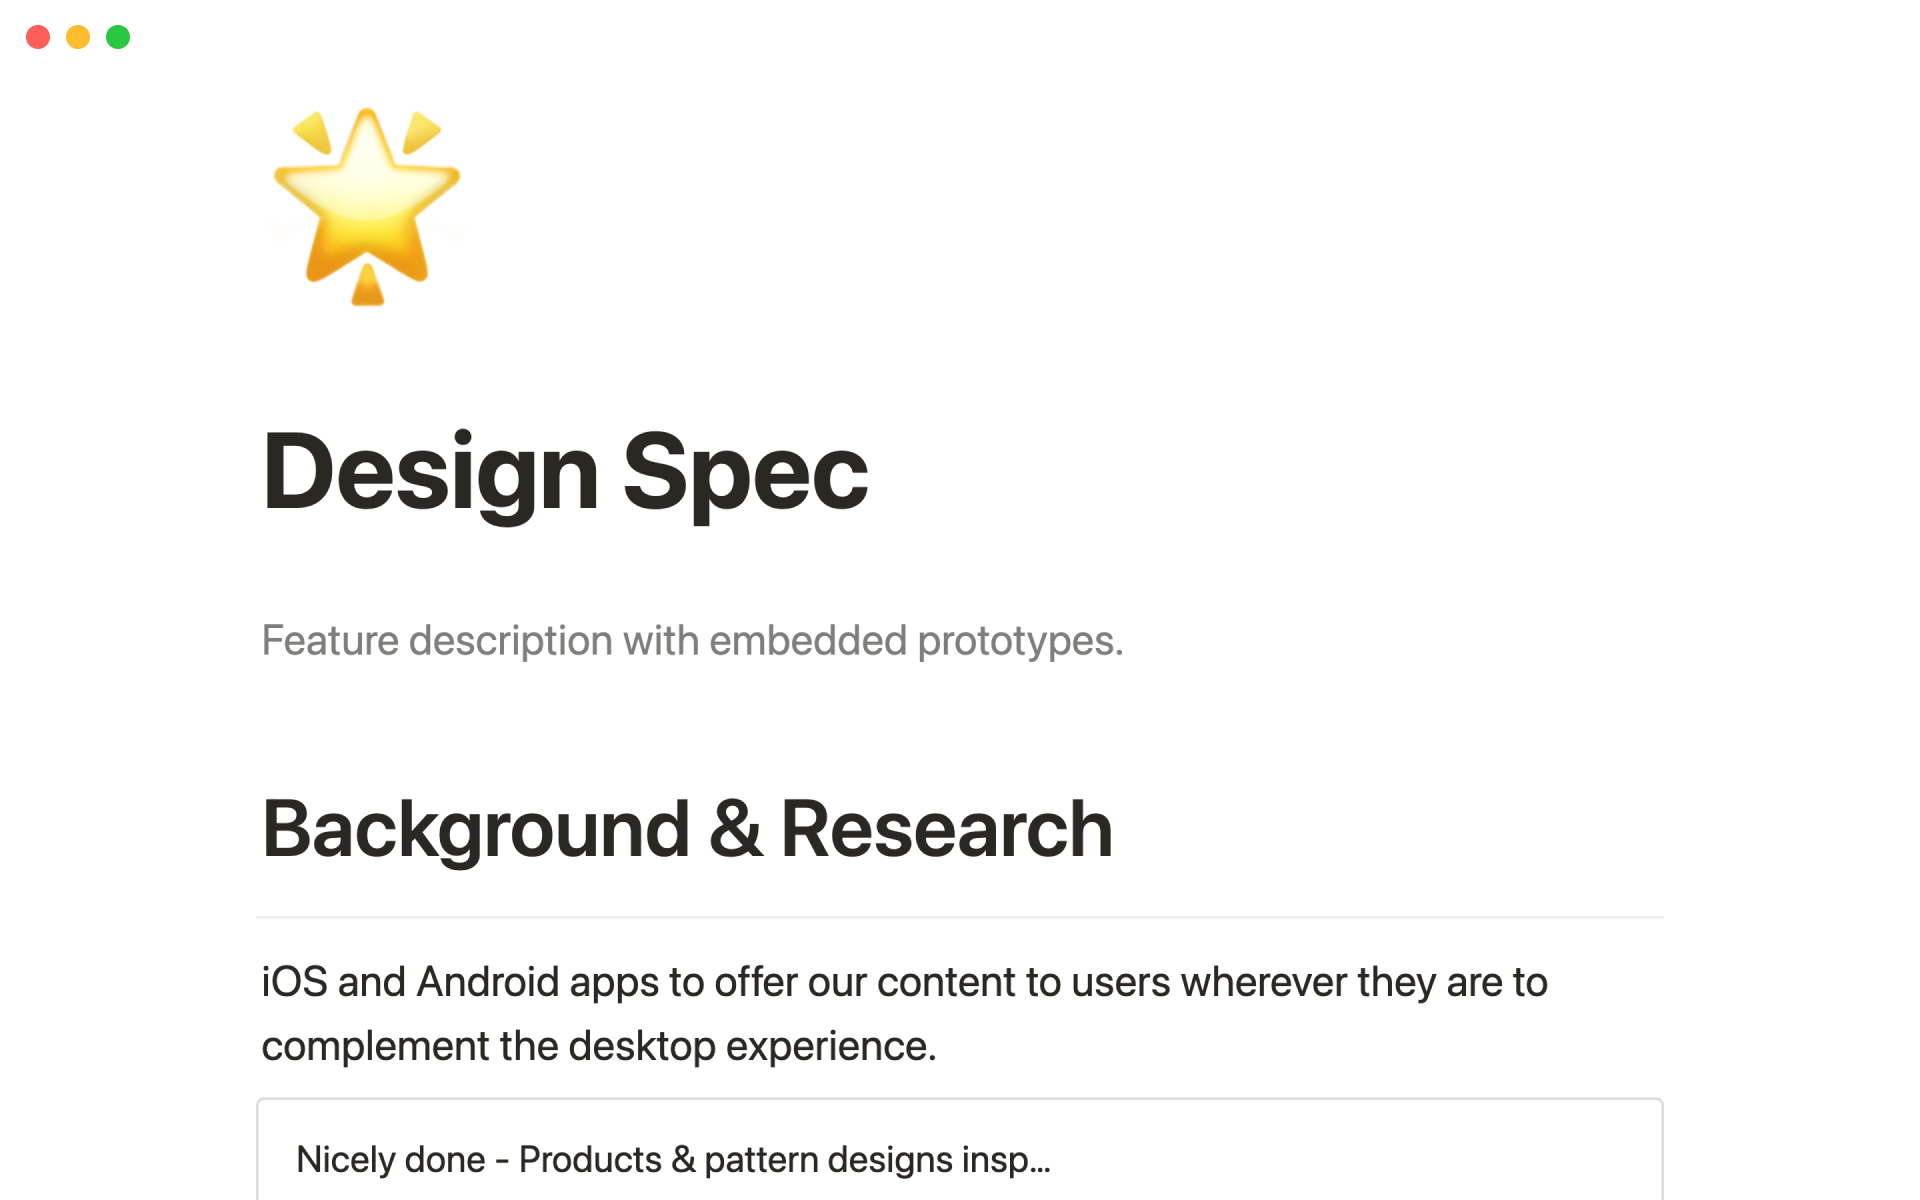 Use this rich design spec to research, plan, and develop new product features or any other type of project.